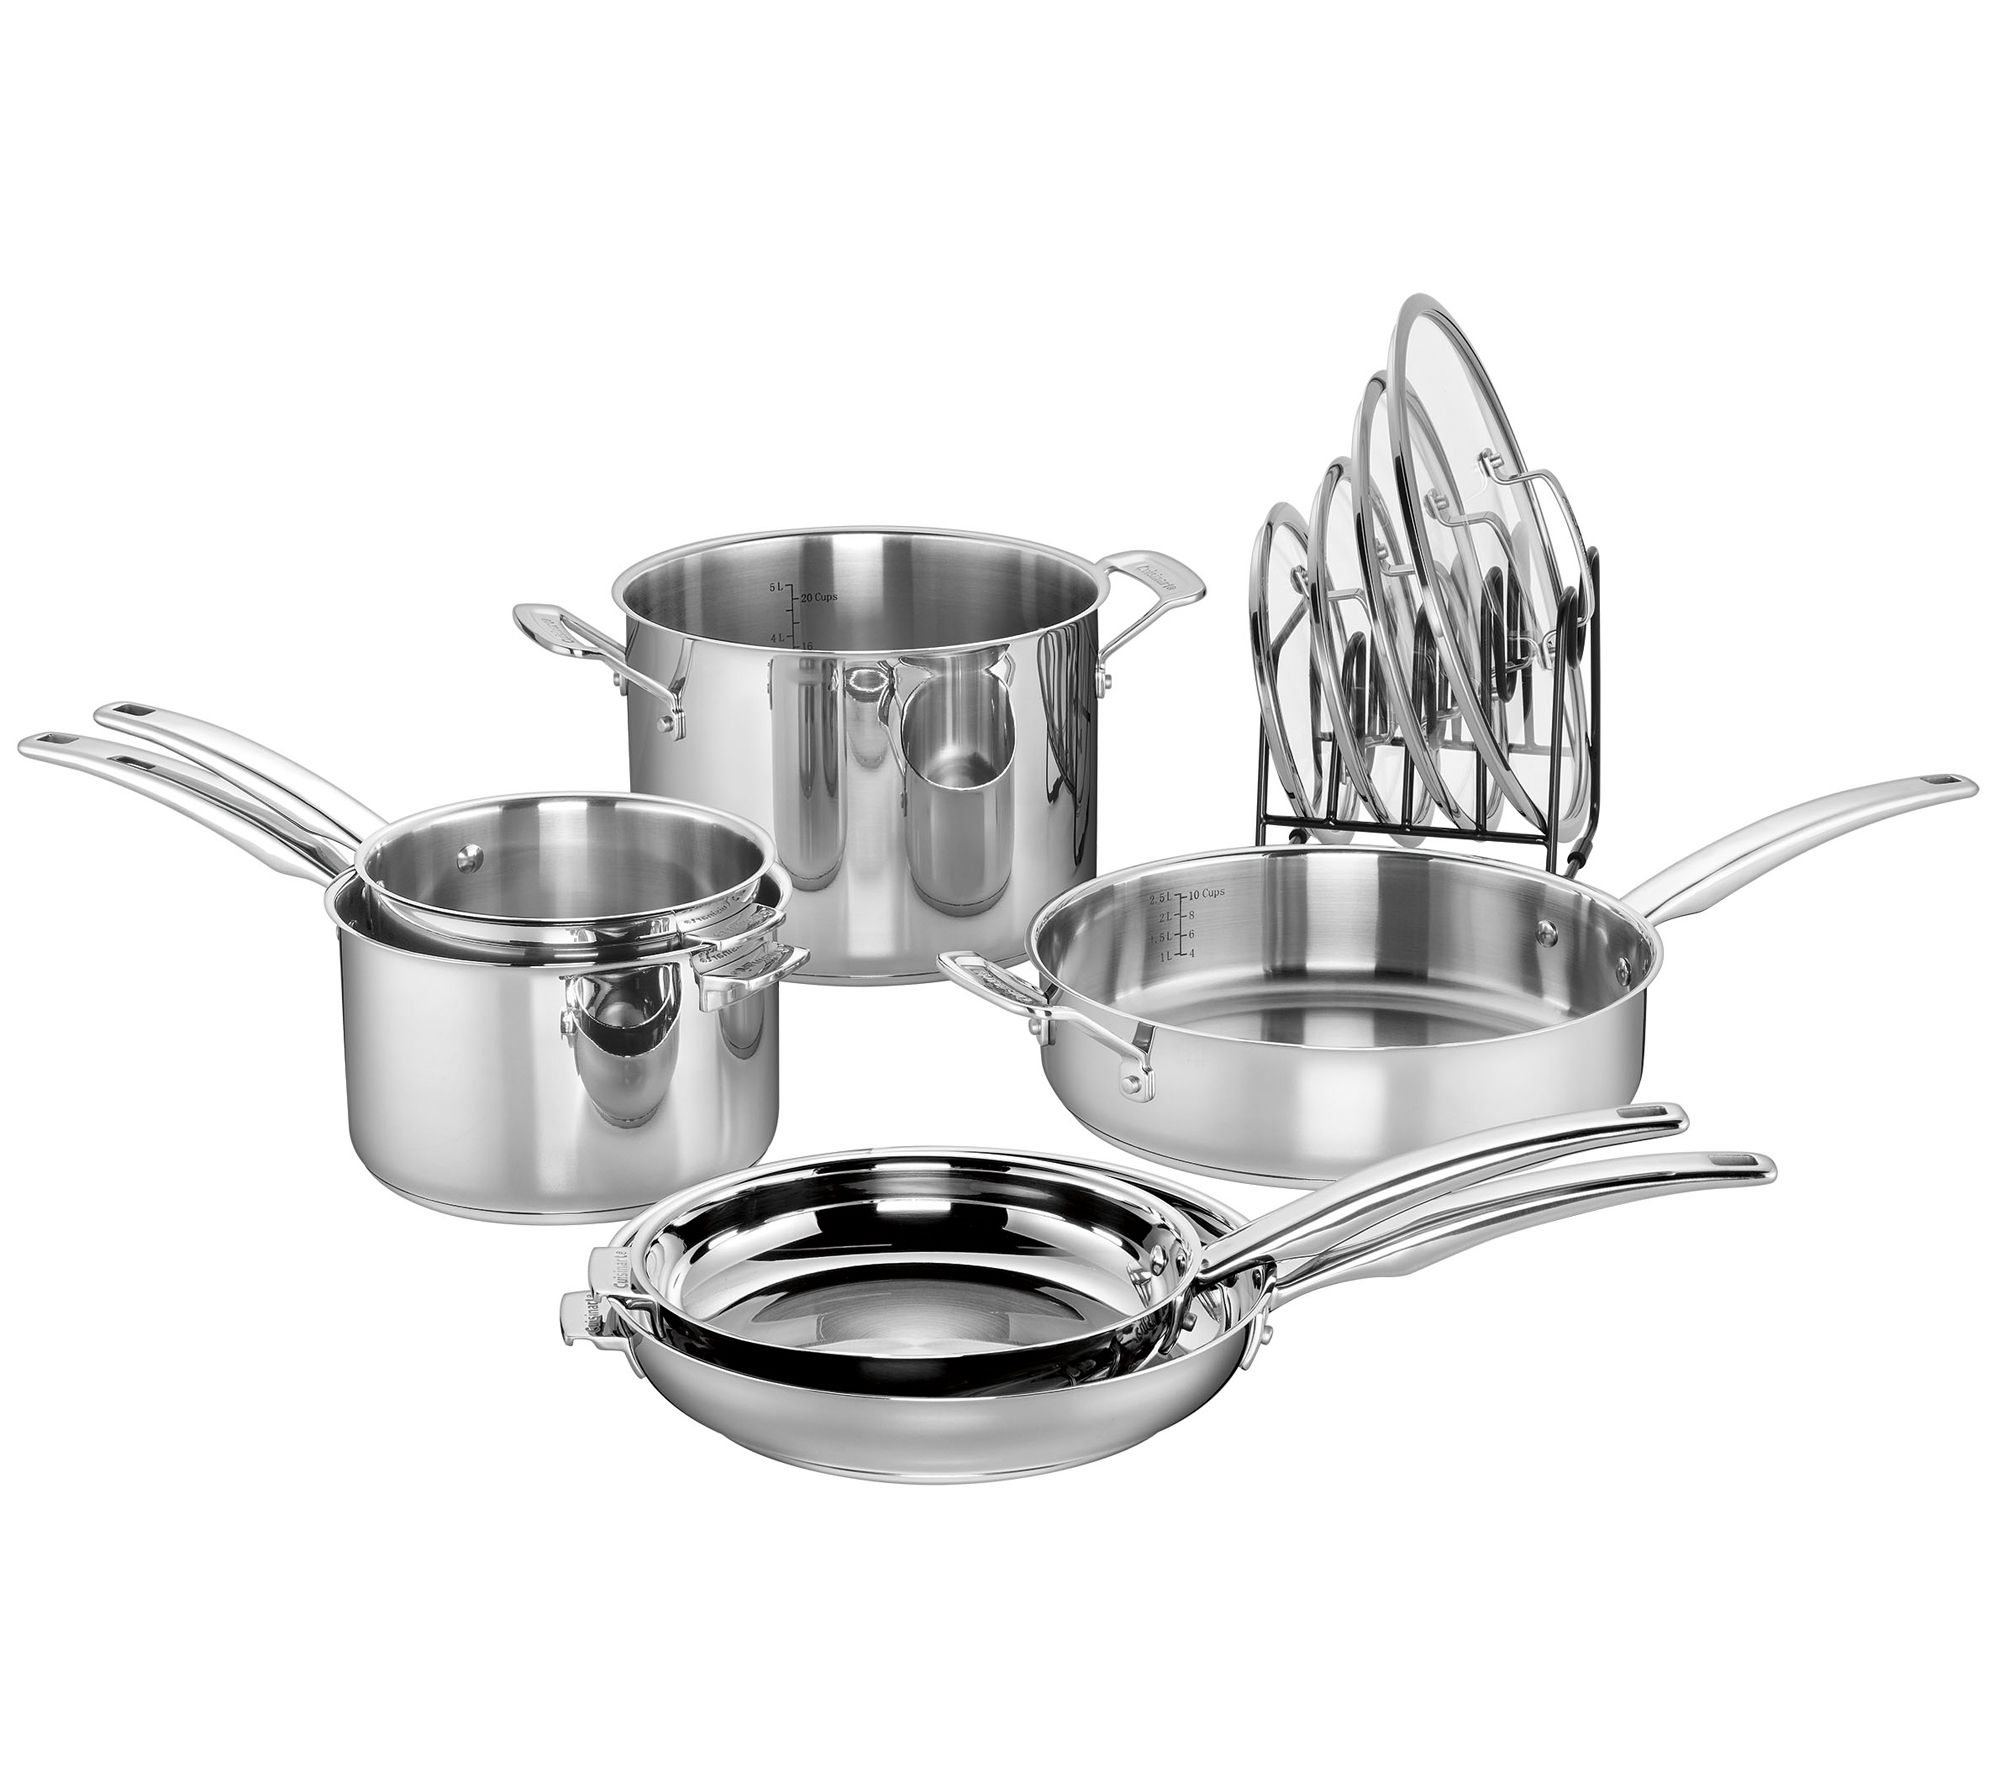 Cuisinart Chef's Classic 7 Piece Stainless Steel Cookware Set